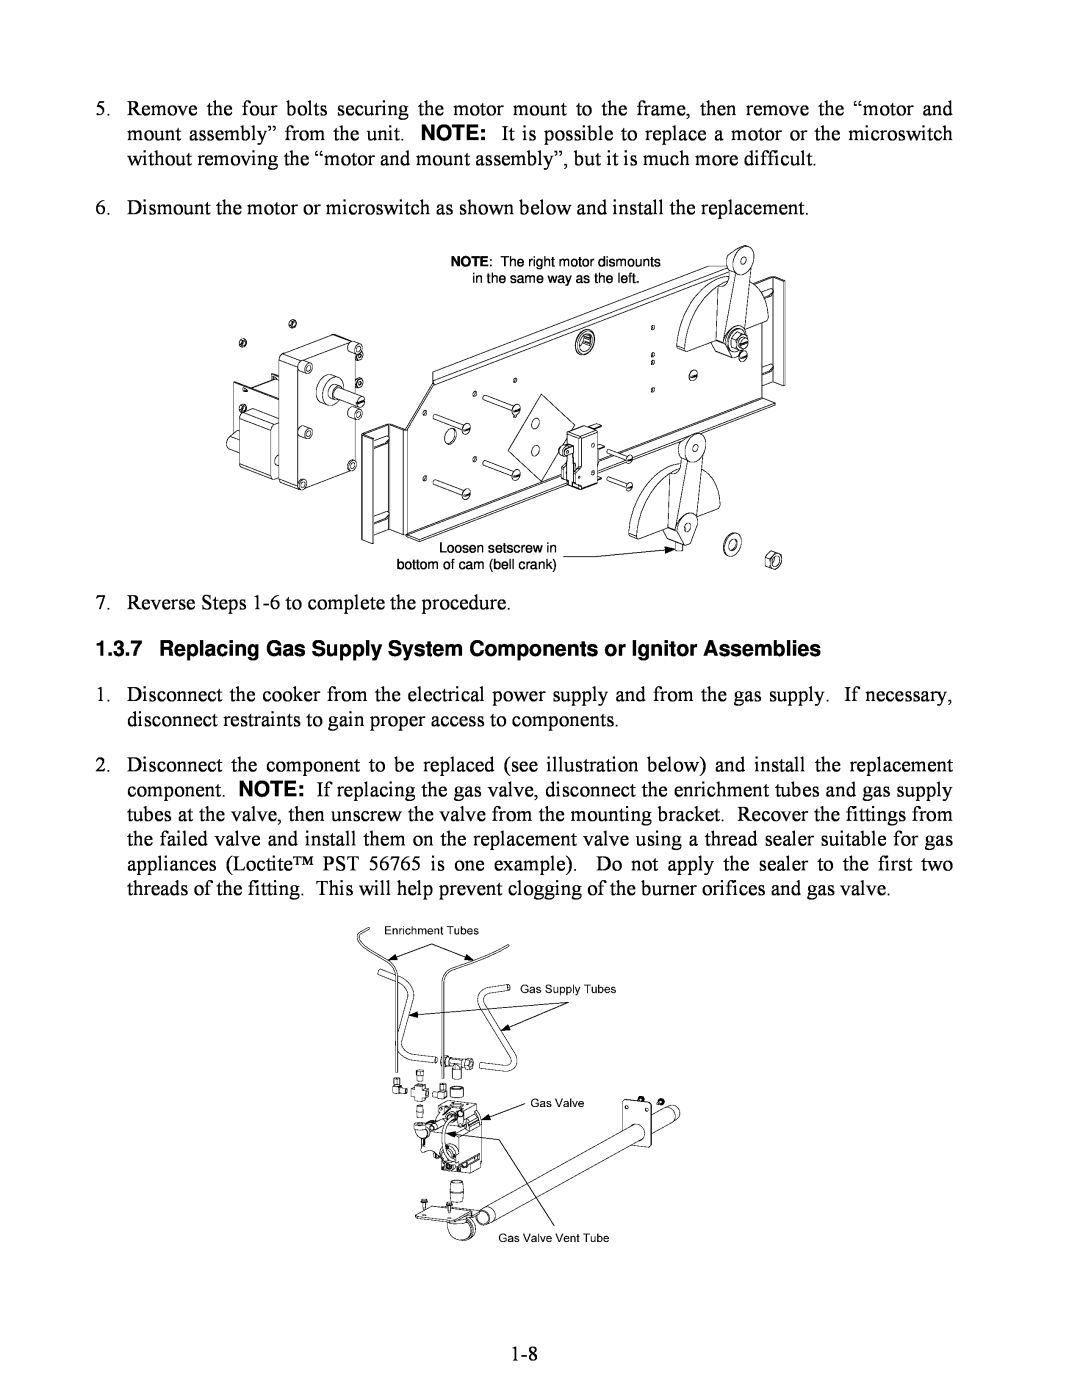 Frymaster 8196692 manual Reverse Steps 1-6to complete the procedure 